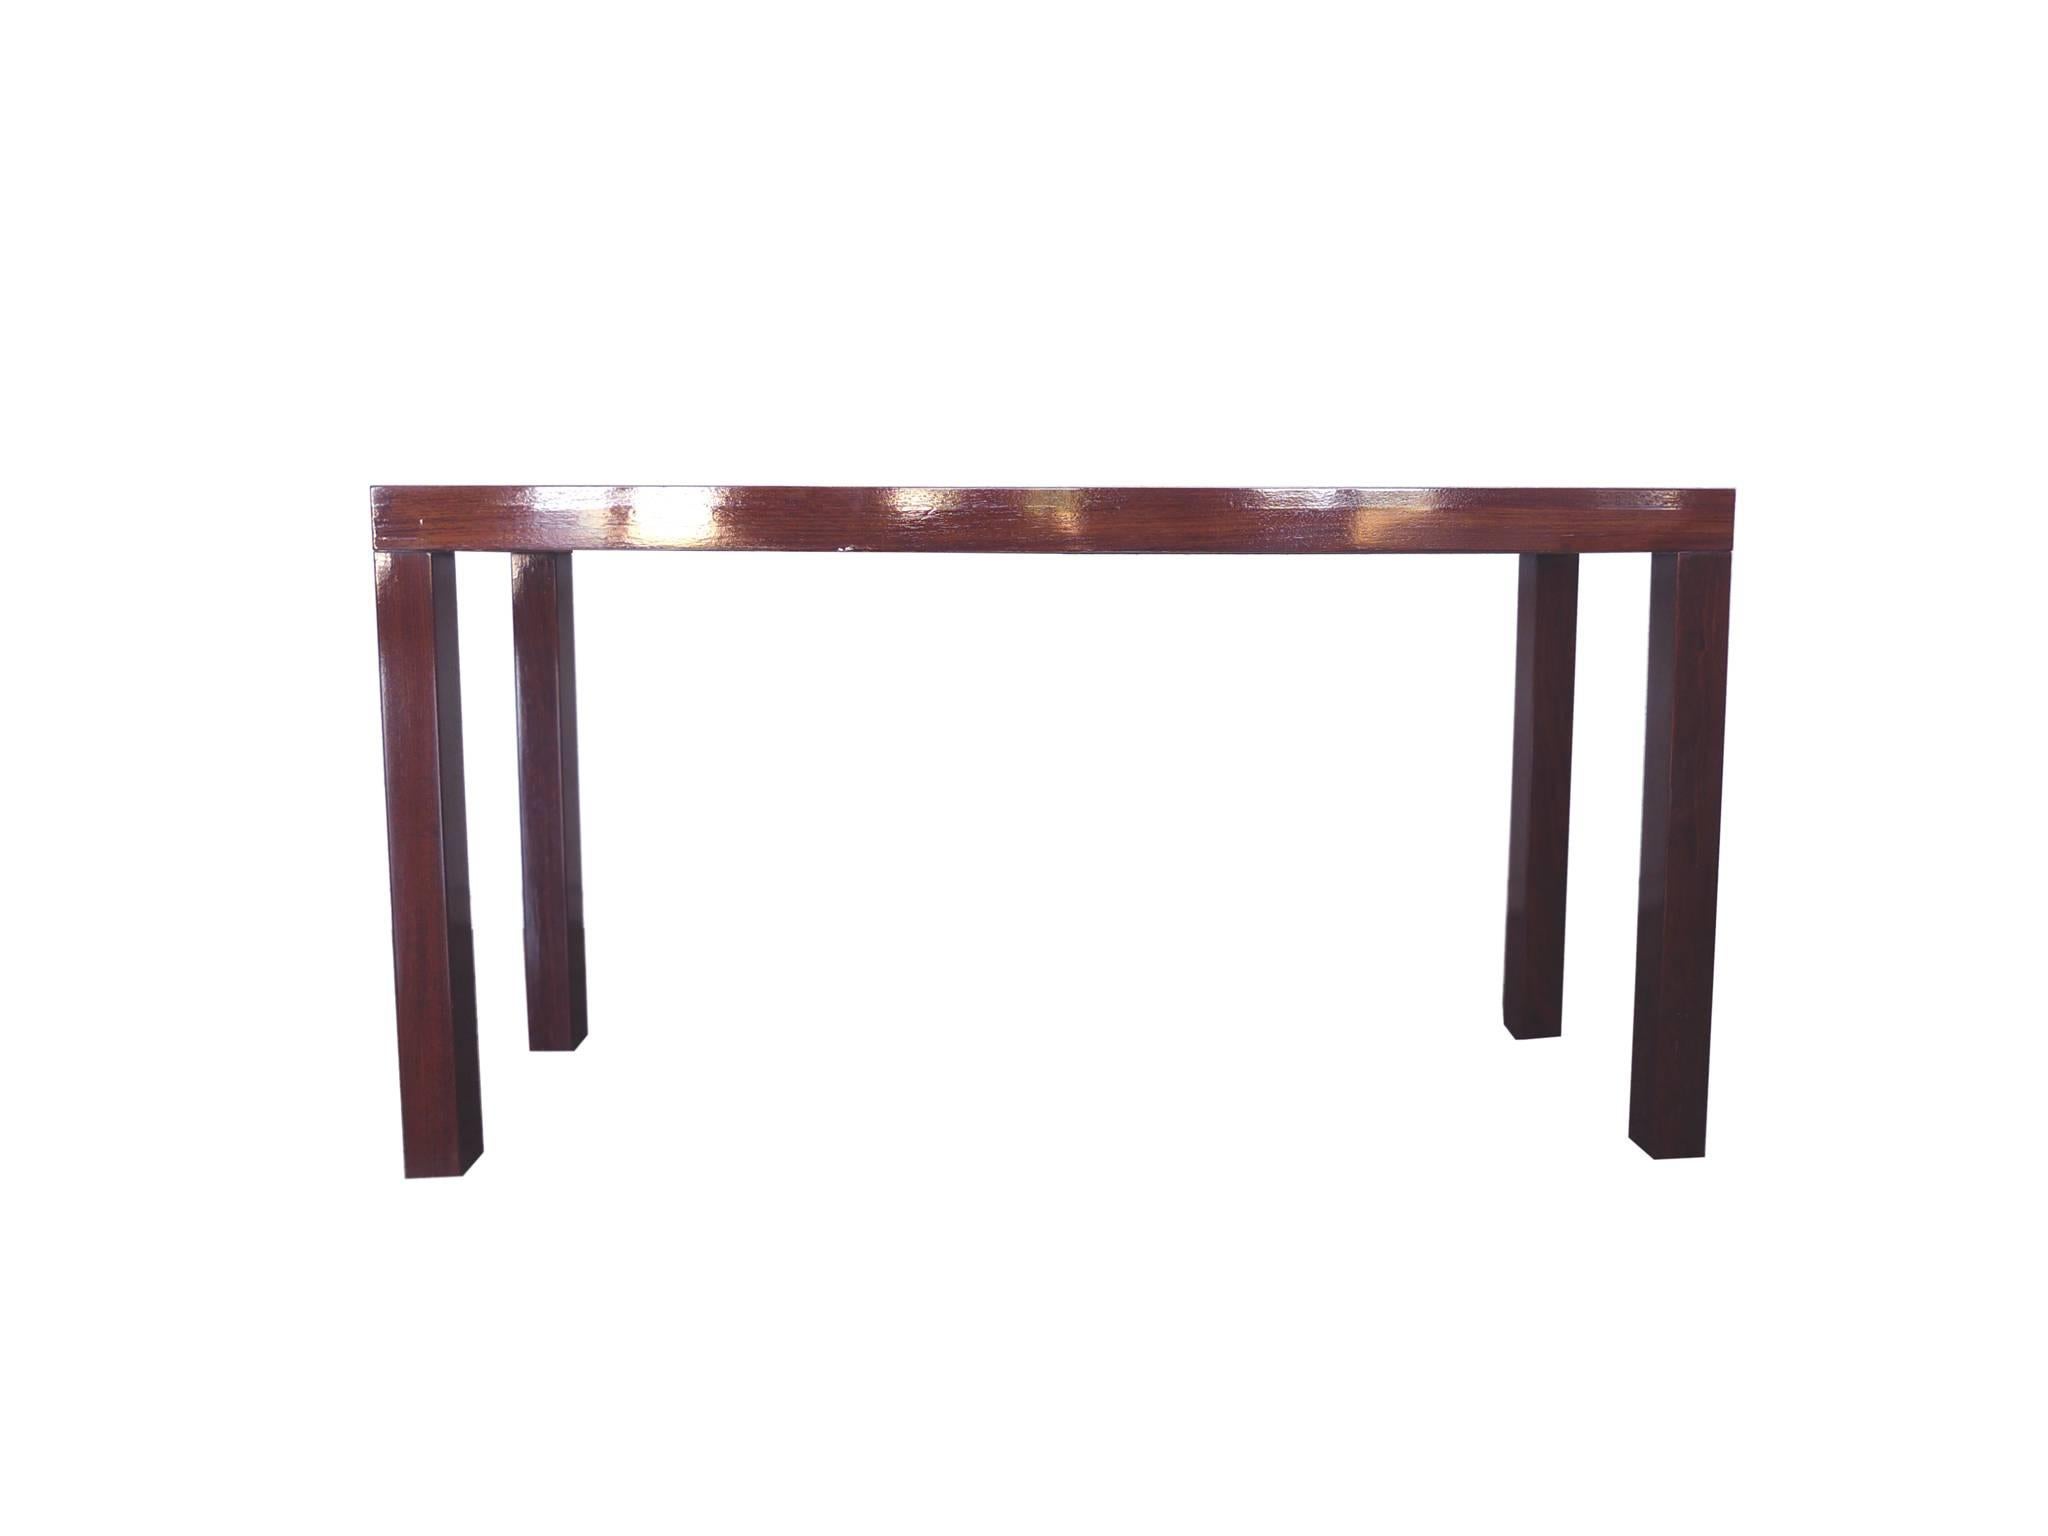 This Danish parsons console table was designed and manufactured by Dyrlund. It's made from mahogany wood, which has been newly lacquered to attain an eye-catching sheen. The lacquer also beautifully coats the wood's natural grain and deep red-brown